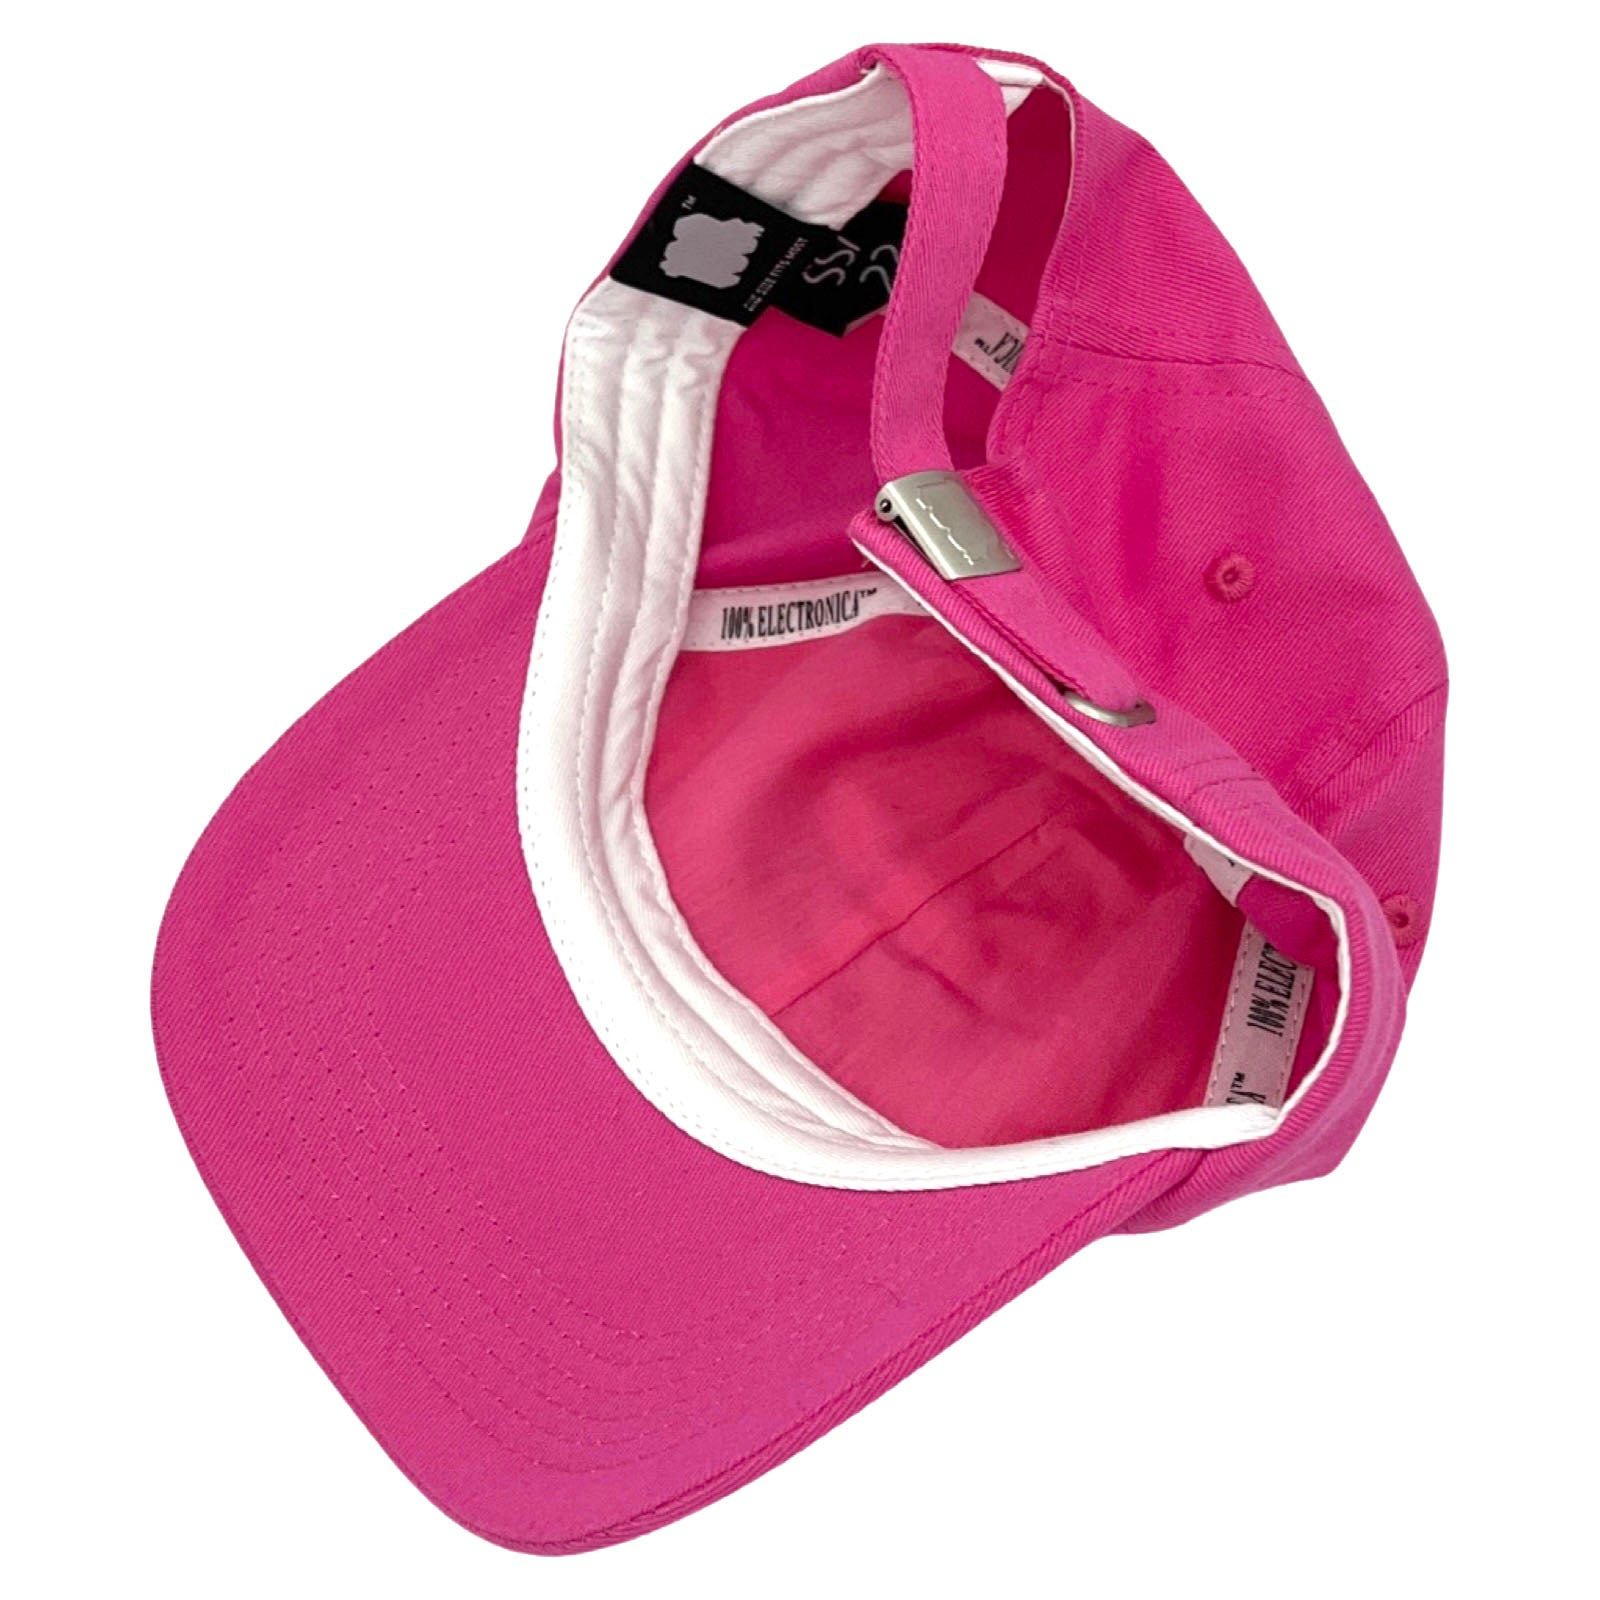 100% Electronica - Melt Logo Cap (Pink) - 100% Electronica Official Store (Photo 2)